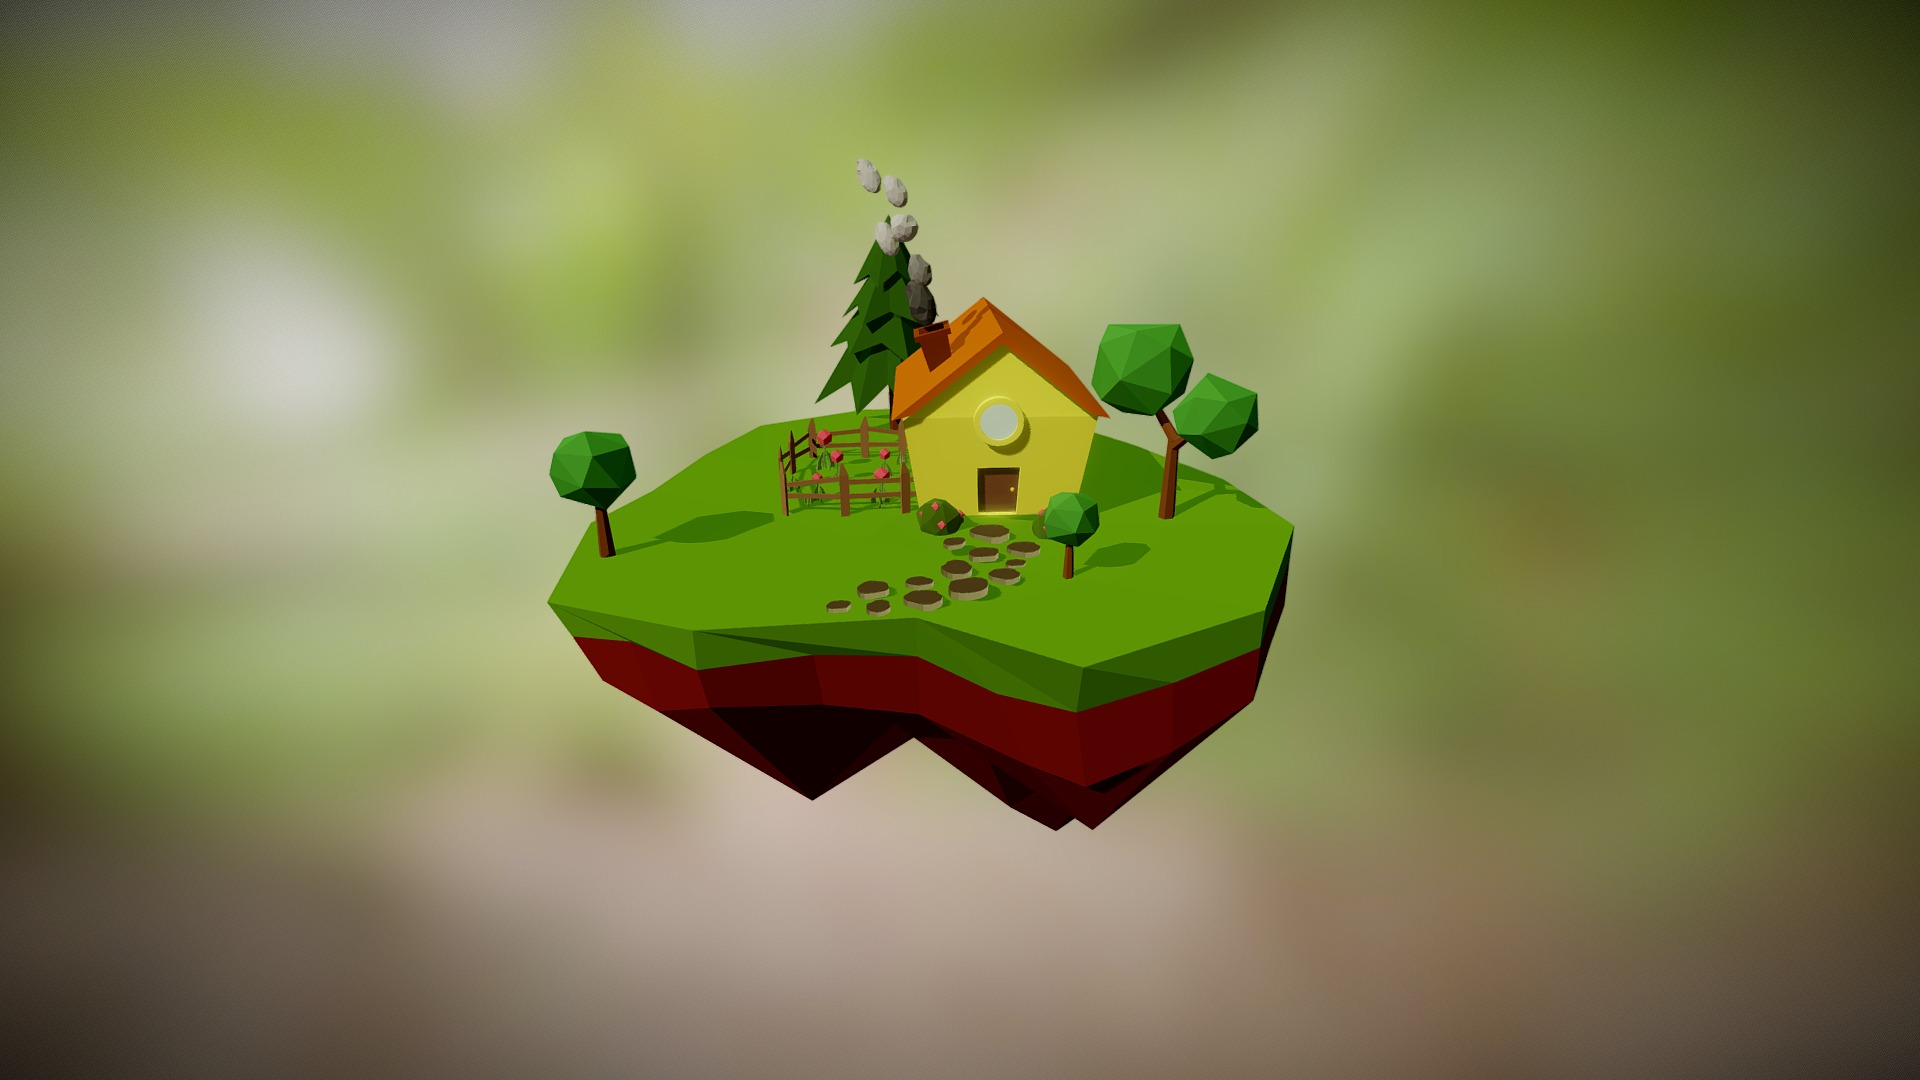 3D model Garden House - This is a 3D model of the Garden House. The 3D model is about a small house on a green and red pillow.